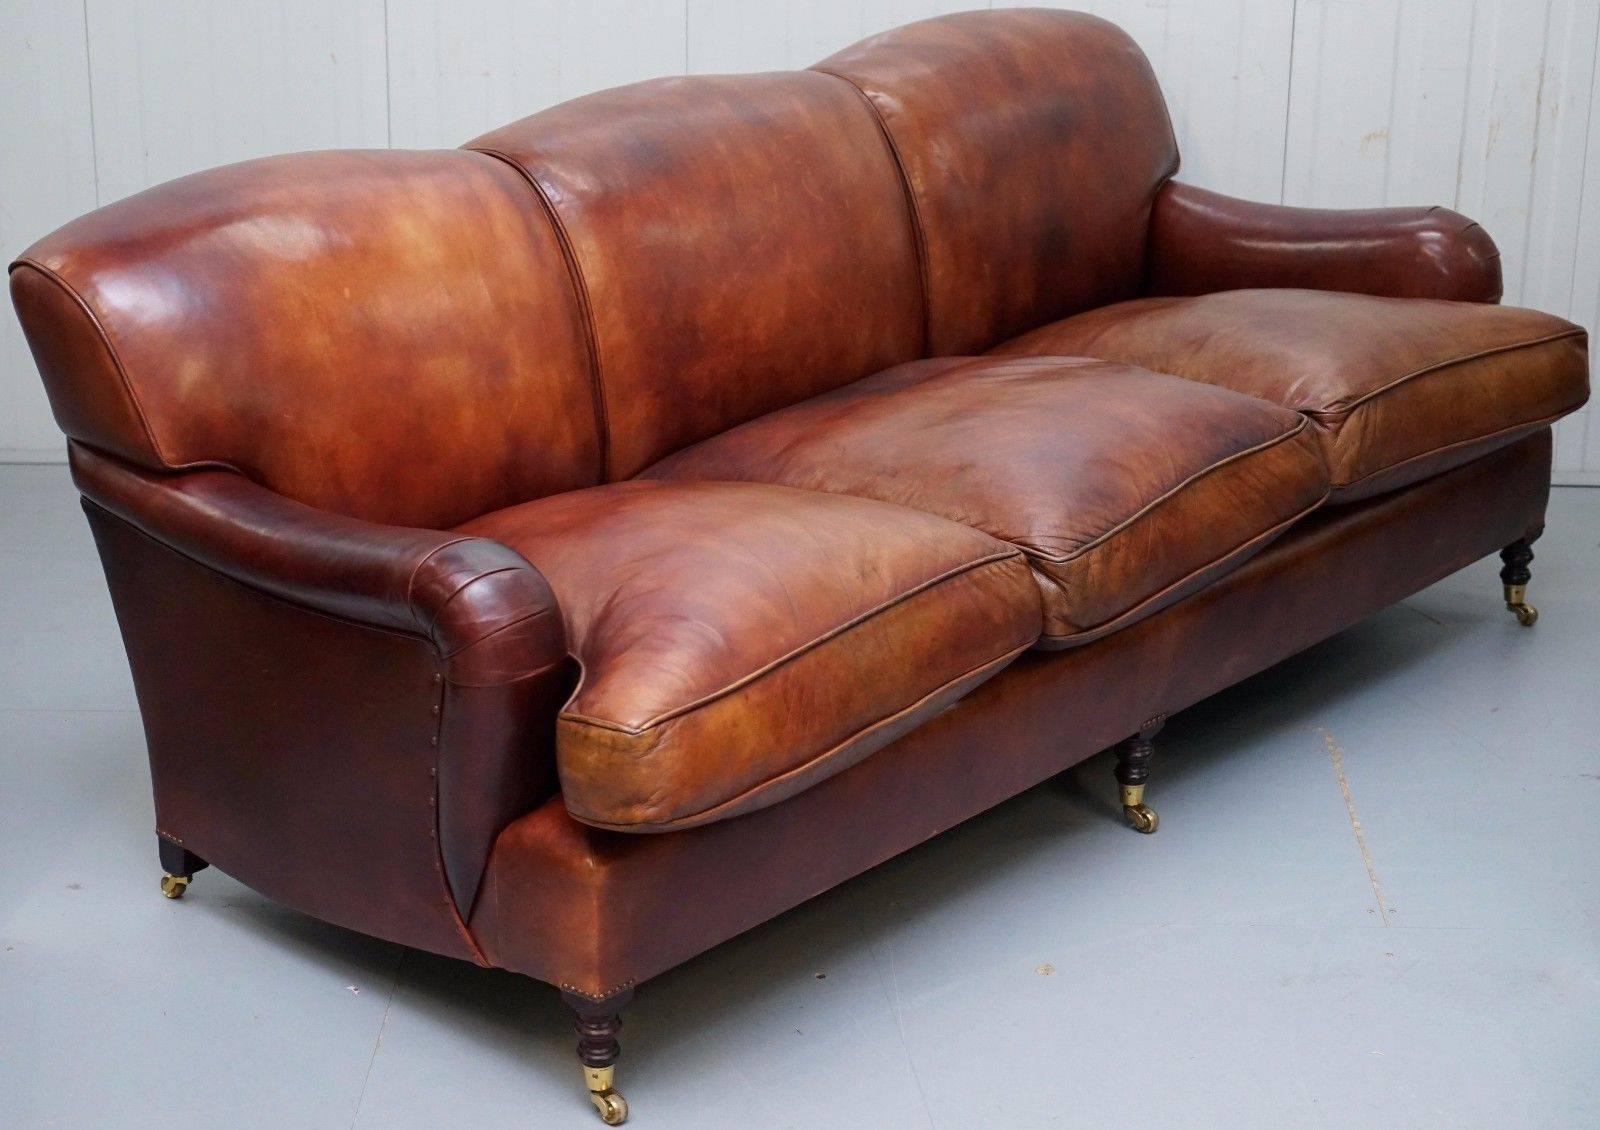 Wimbledon-Furniture is delighted to offer for sale this lovely original George Smith Signature Howard hand dyed leather feather filled cushion sofa

Please note the delivery fee listed is just a guide, for an accurate quote please send me your